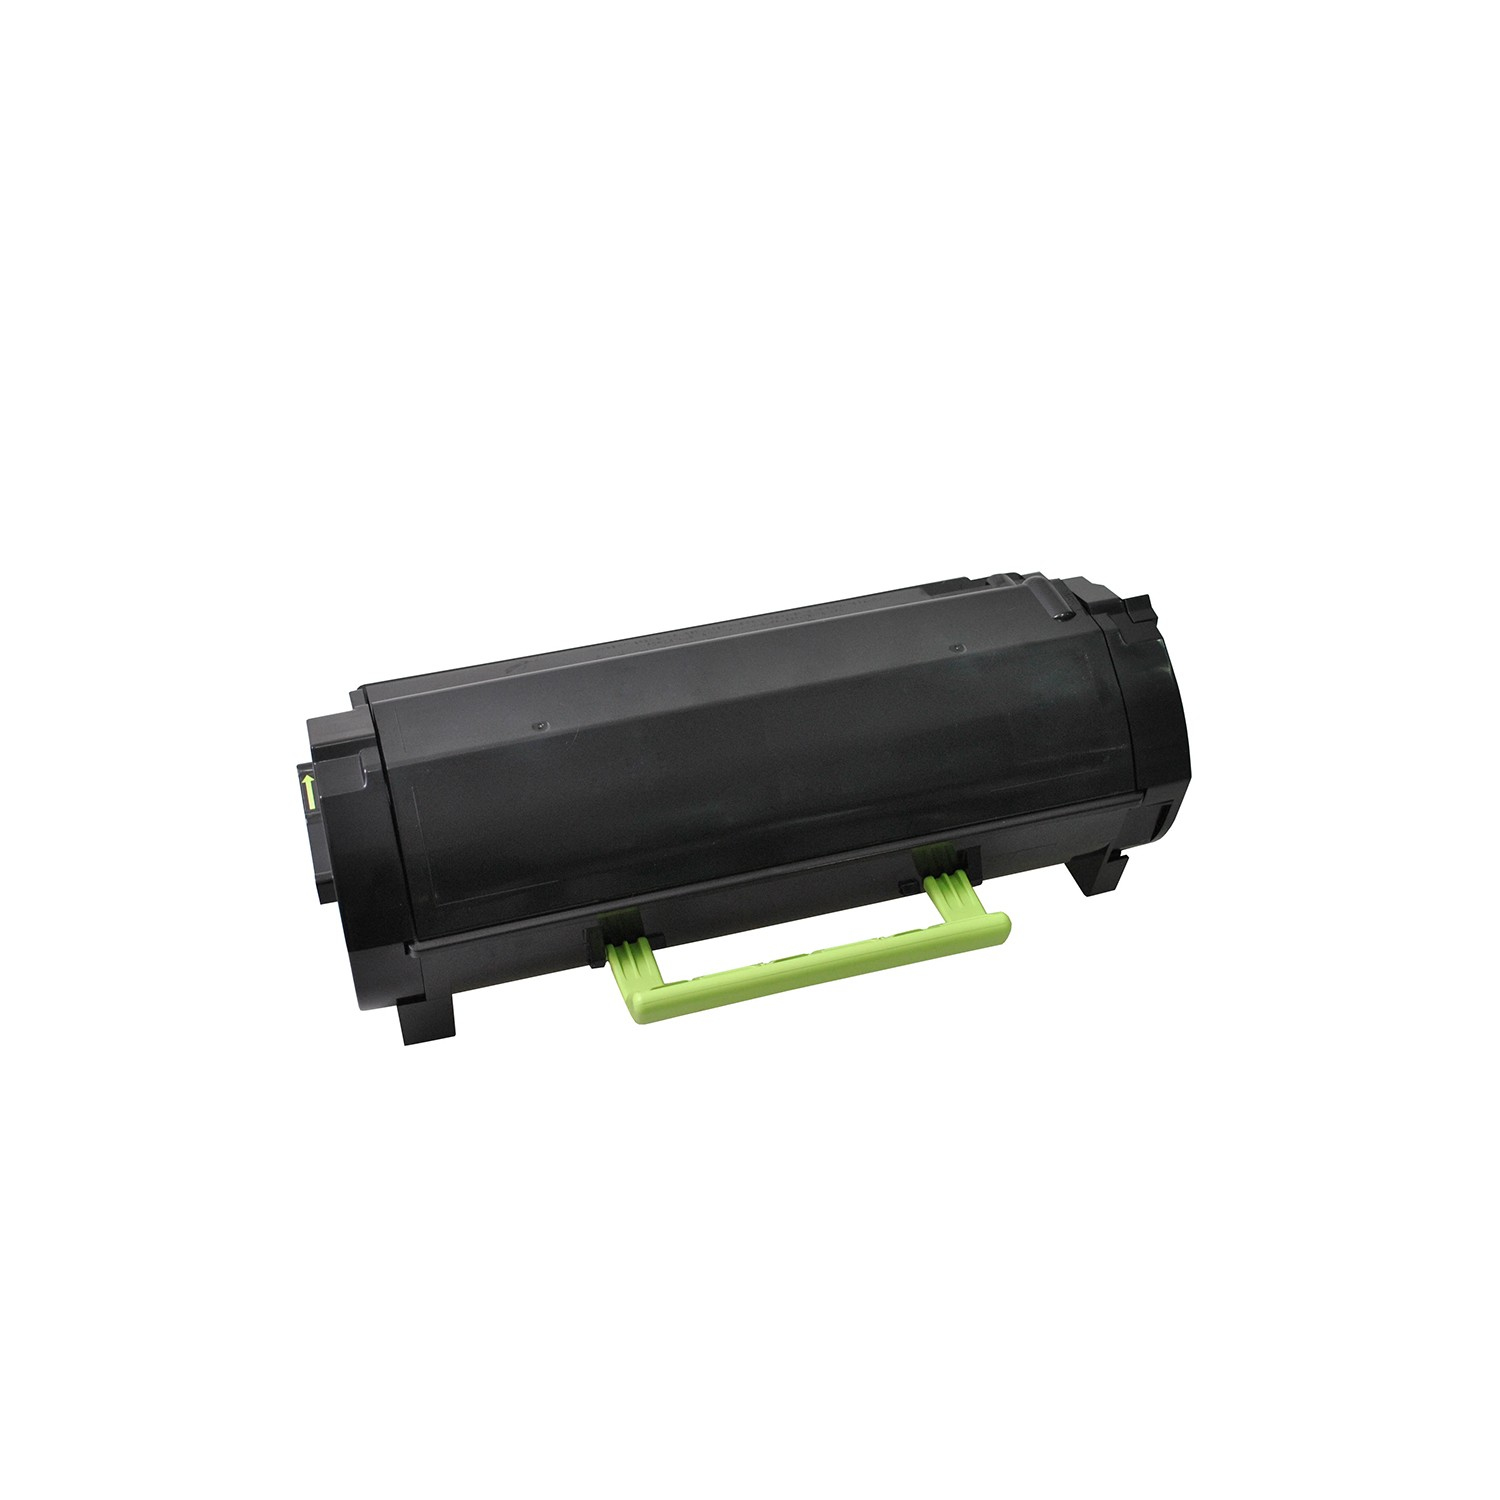 V7 Toner for selected Lexmark printers - Replacement for OEM cartridge part number 24B6035